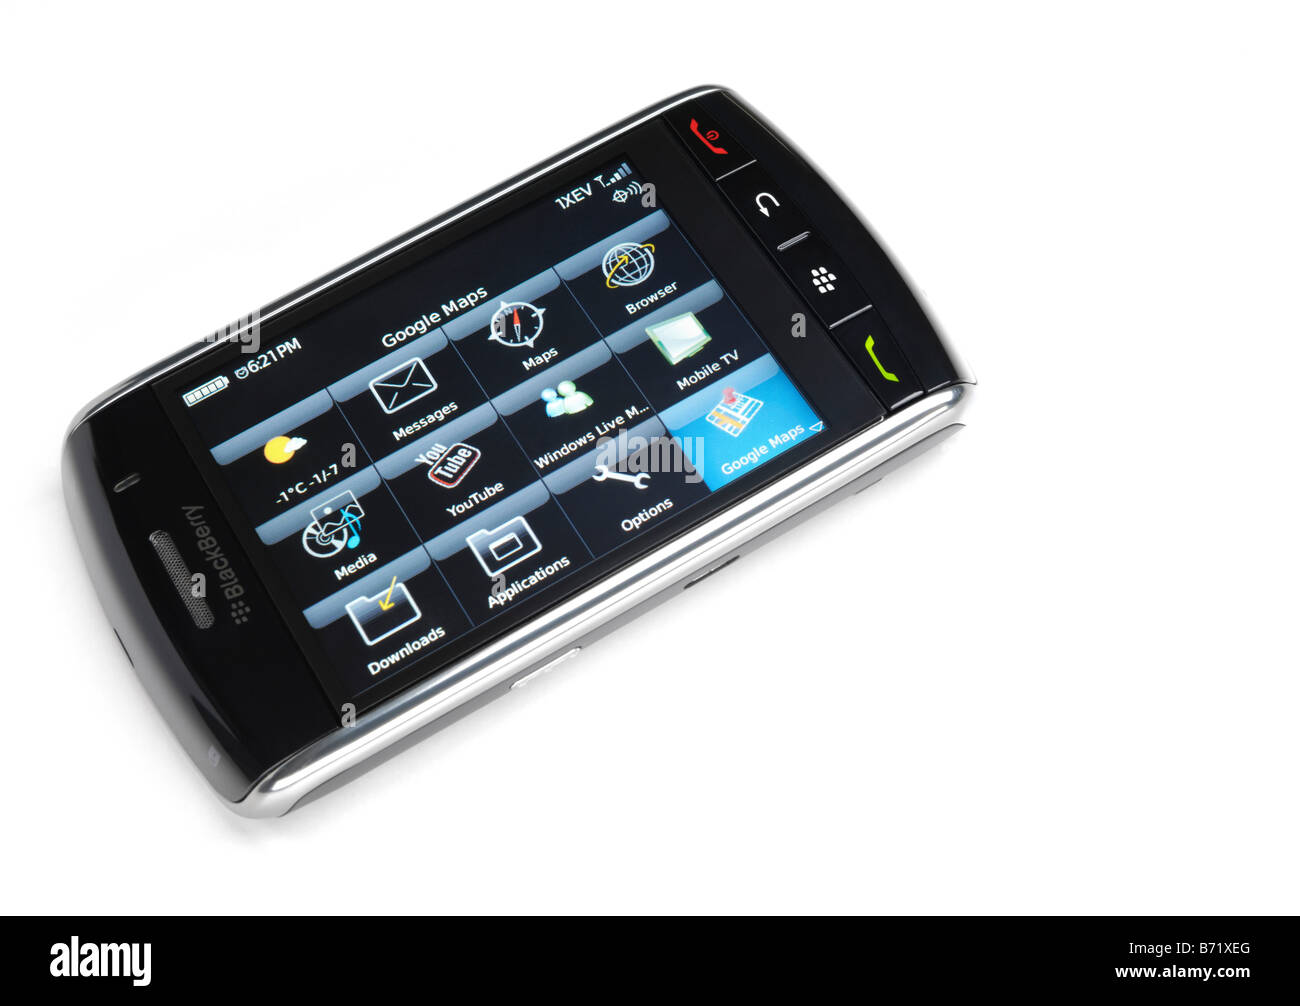 BlackBerry Storm touch screen smartphone Stock Photo